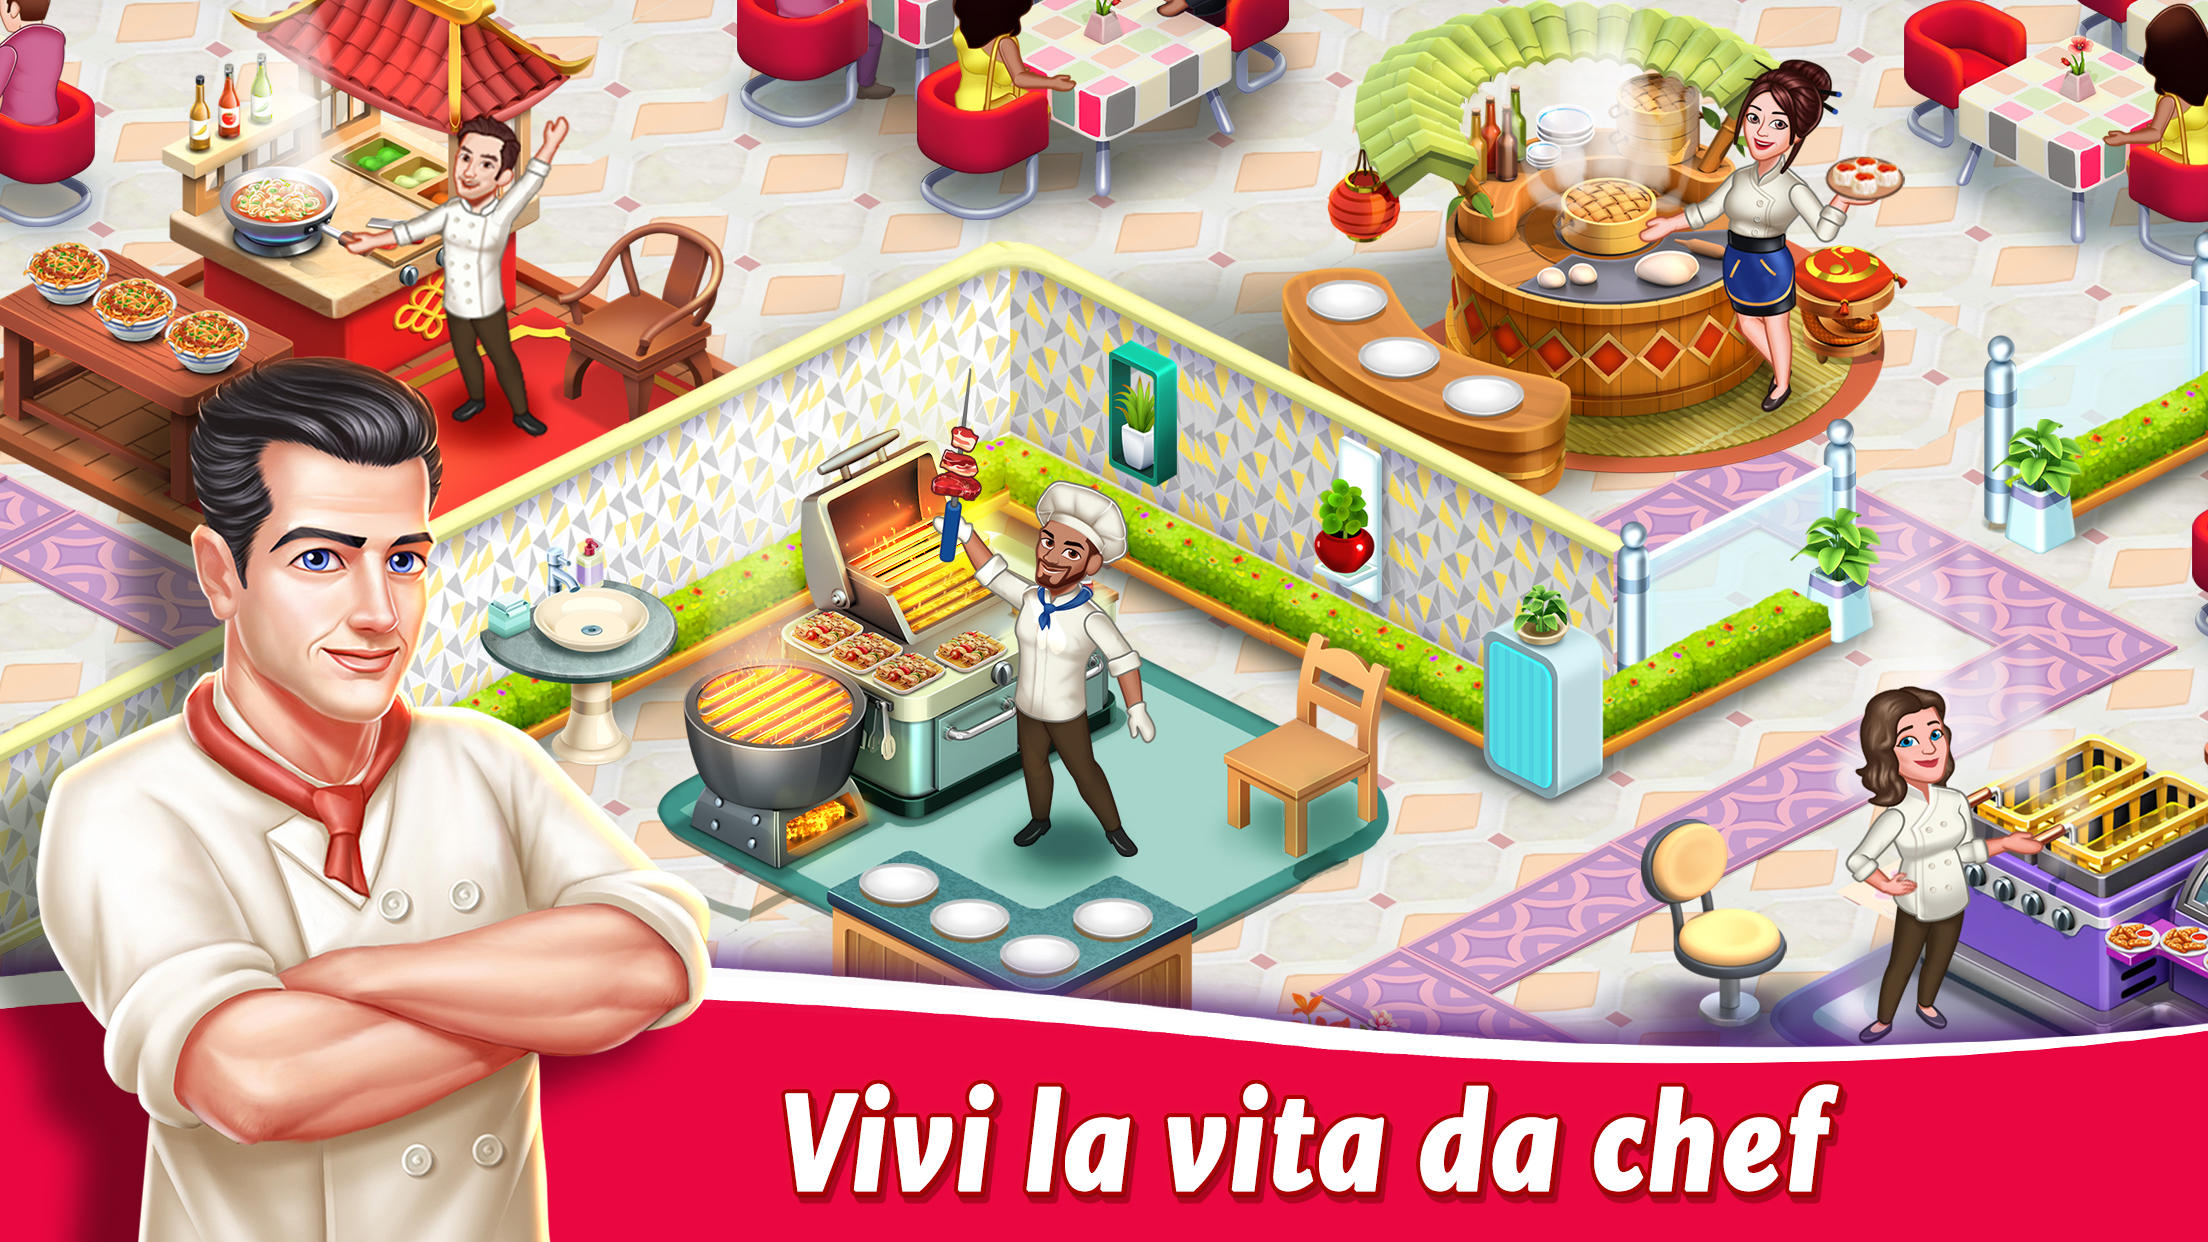 Screenshot 1 of Star Chef 2: Cooking Game 1.7.2